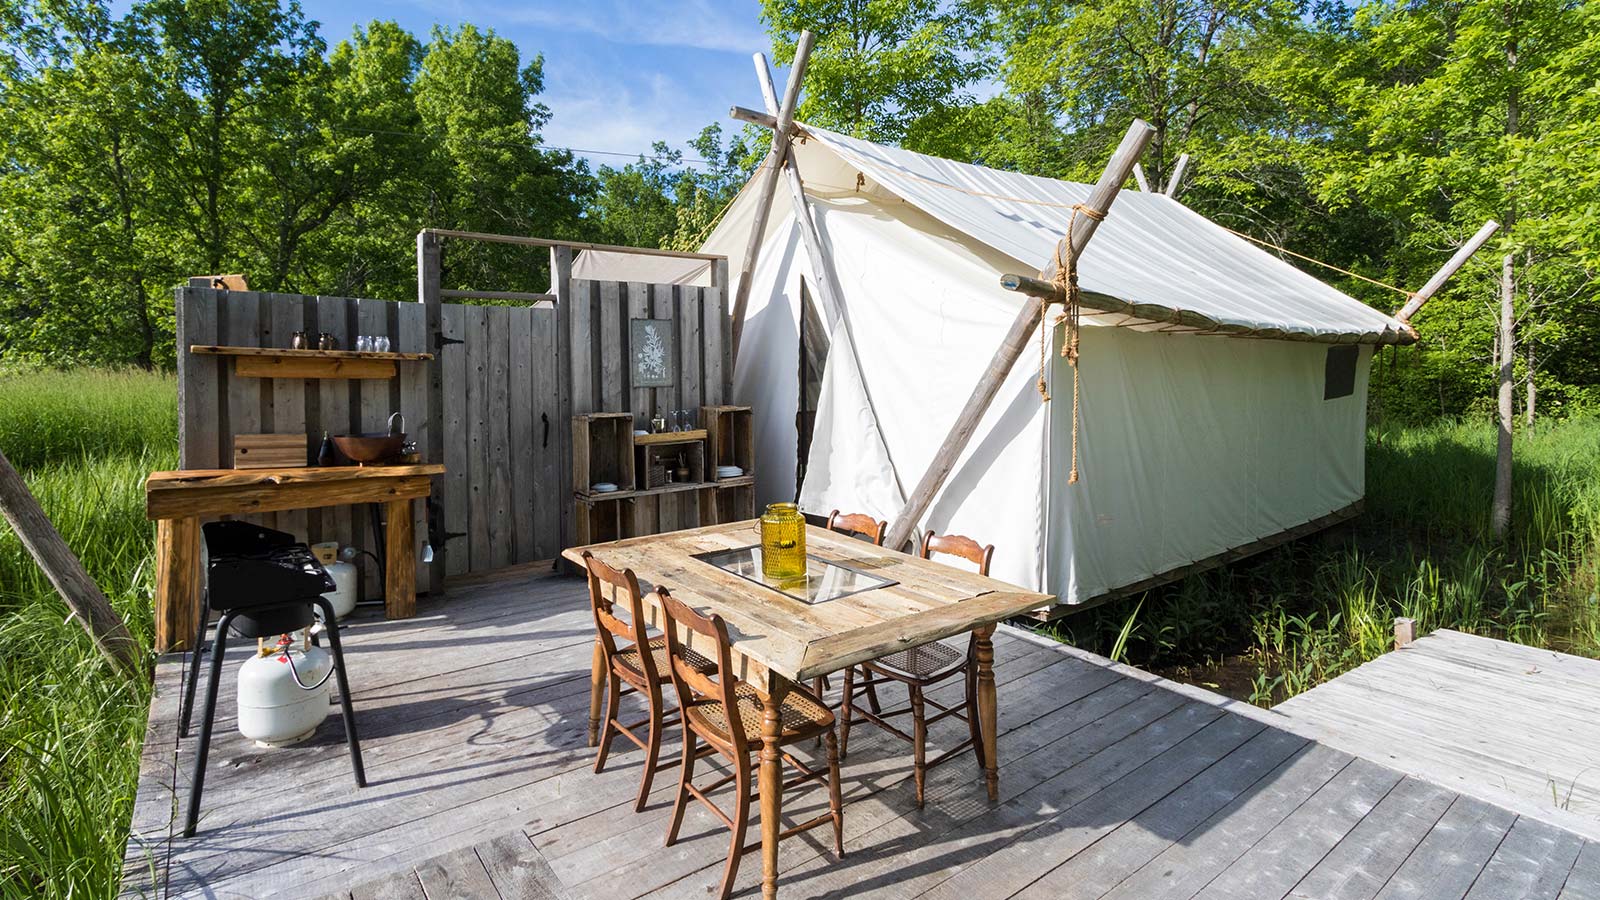 Find out why there's no better way to experience Ontario's wineries and culinary delights than by glamping Prince Edward County at Fronterra Farm and Camp